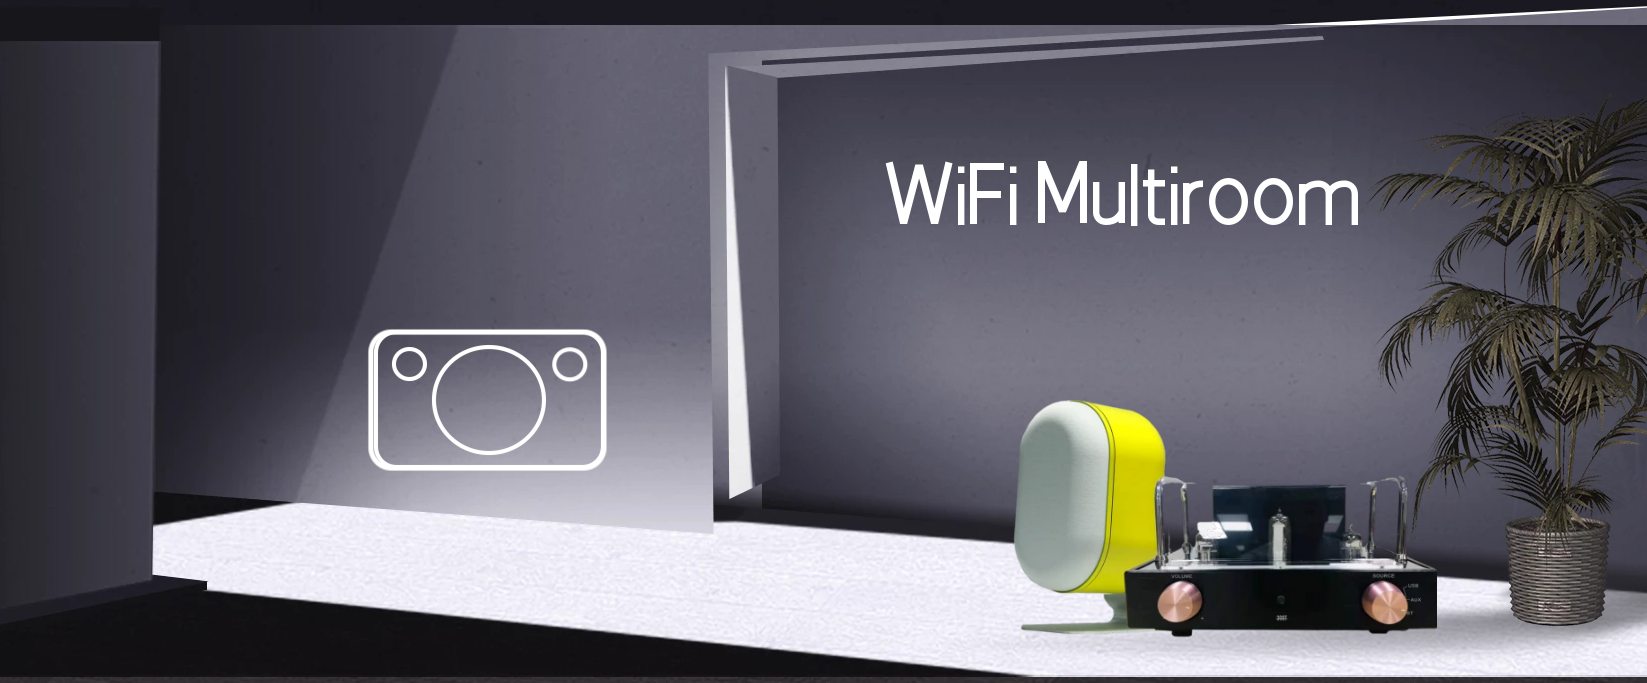 Davecl wifi multiroom Products